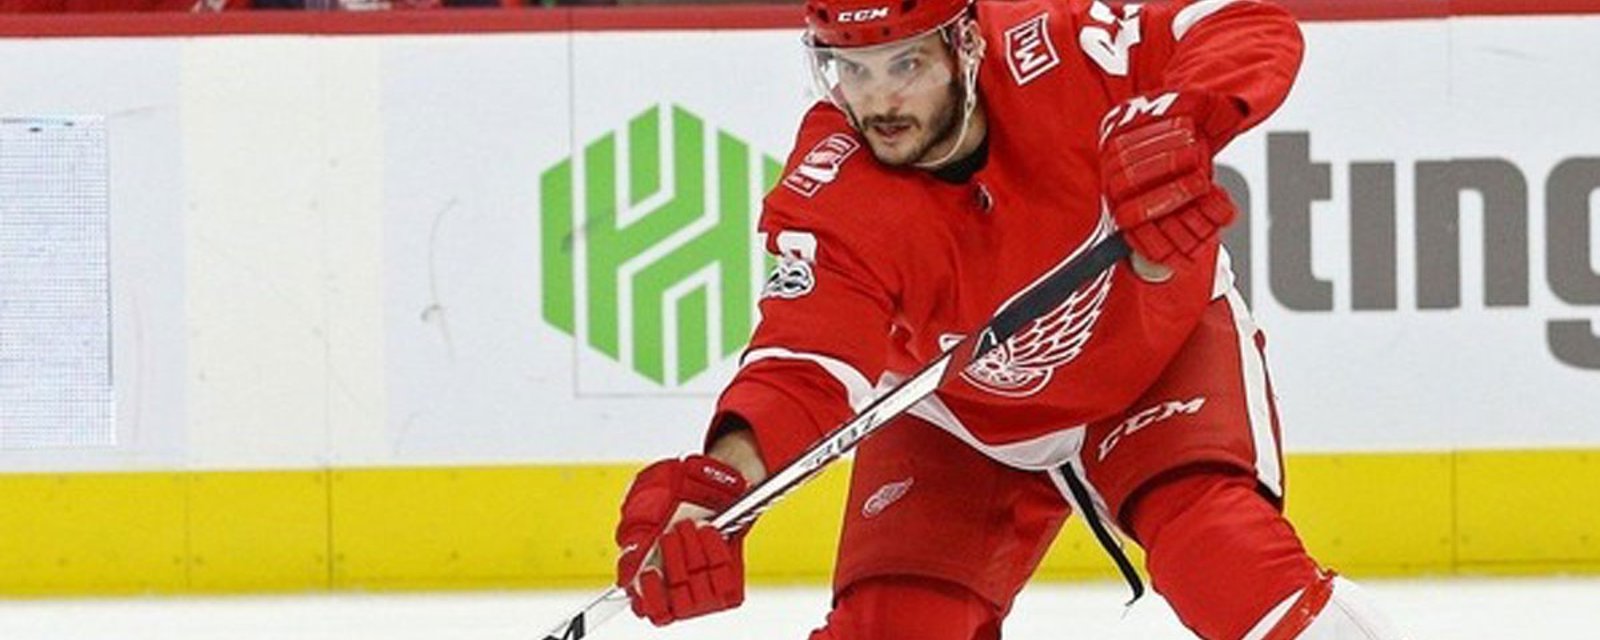 Breaking: Wings place young forward Frk on waivers! 